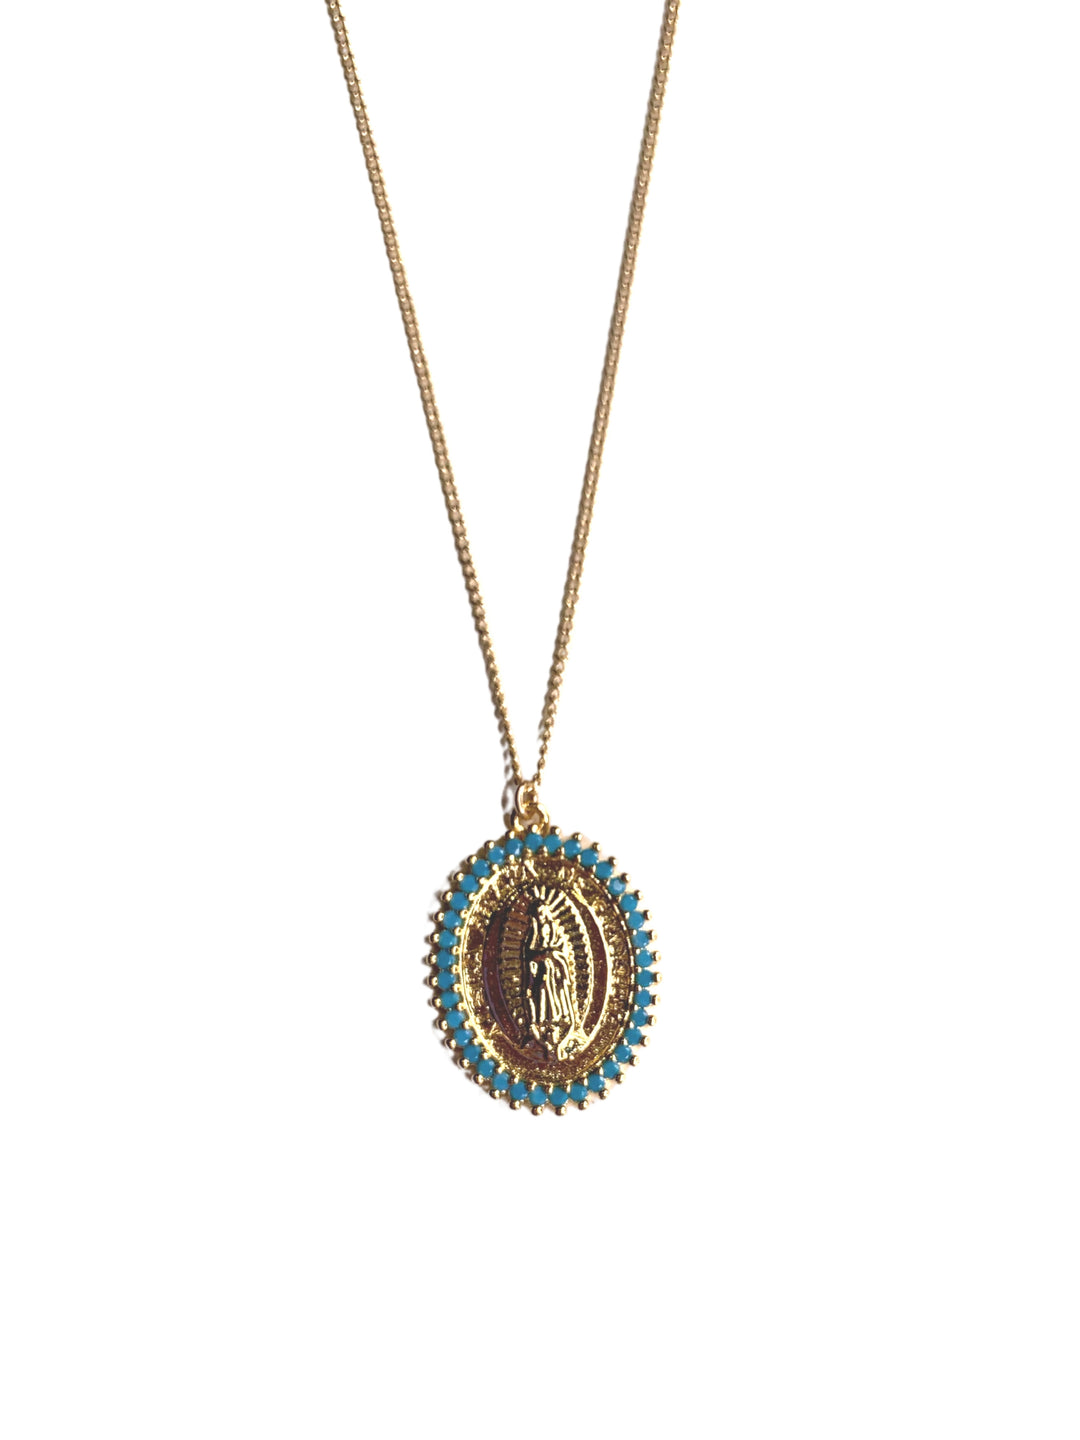 PAVE CRYSTAL "MARY" COIN NECKLACE - Kingfisher Road - Online Boutique